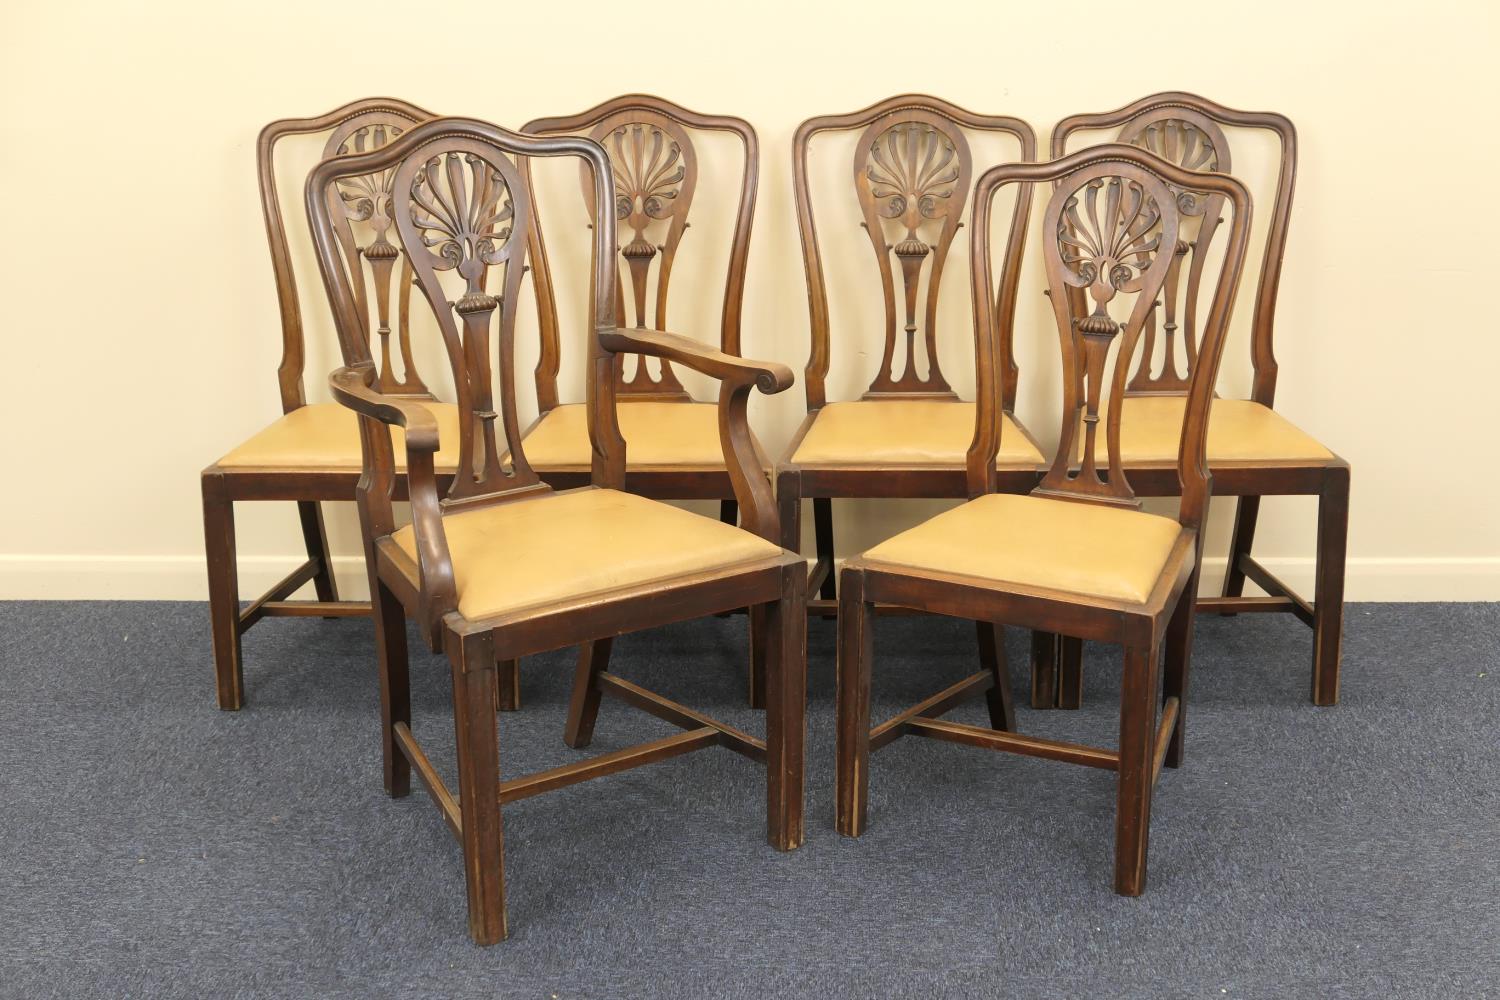 Set of six Edwardian mahogany dining chairs (5 + 1), in the Georgian style, each with an anthemion